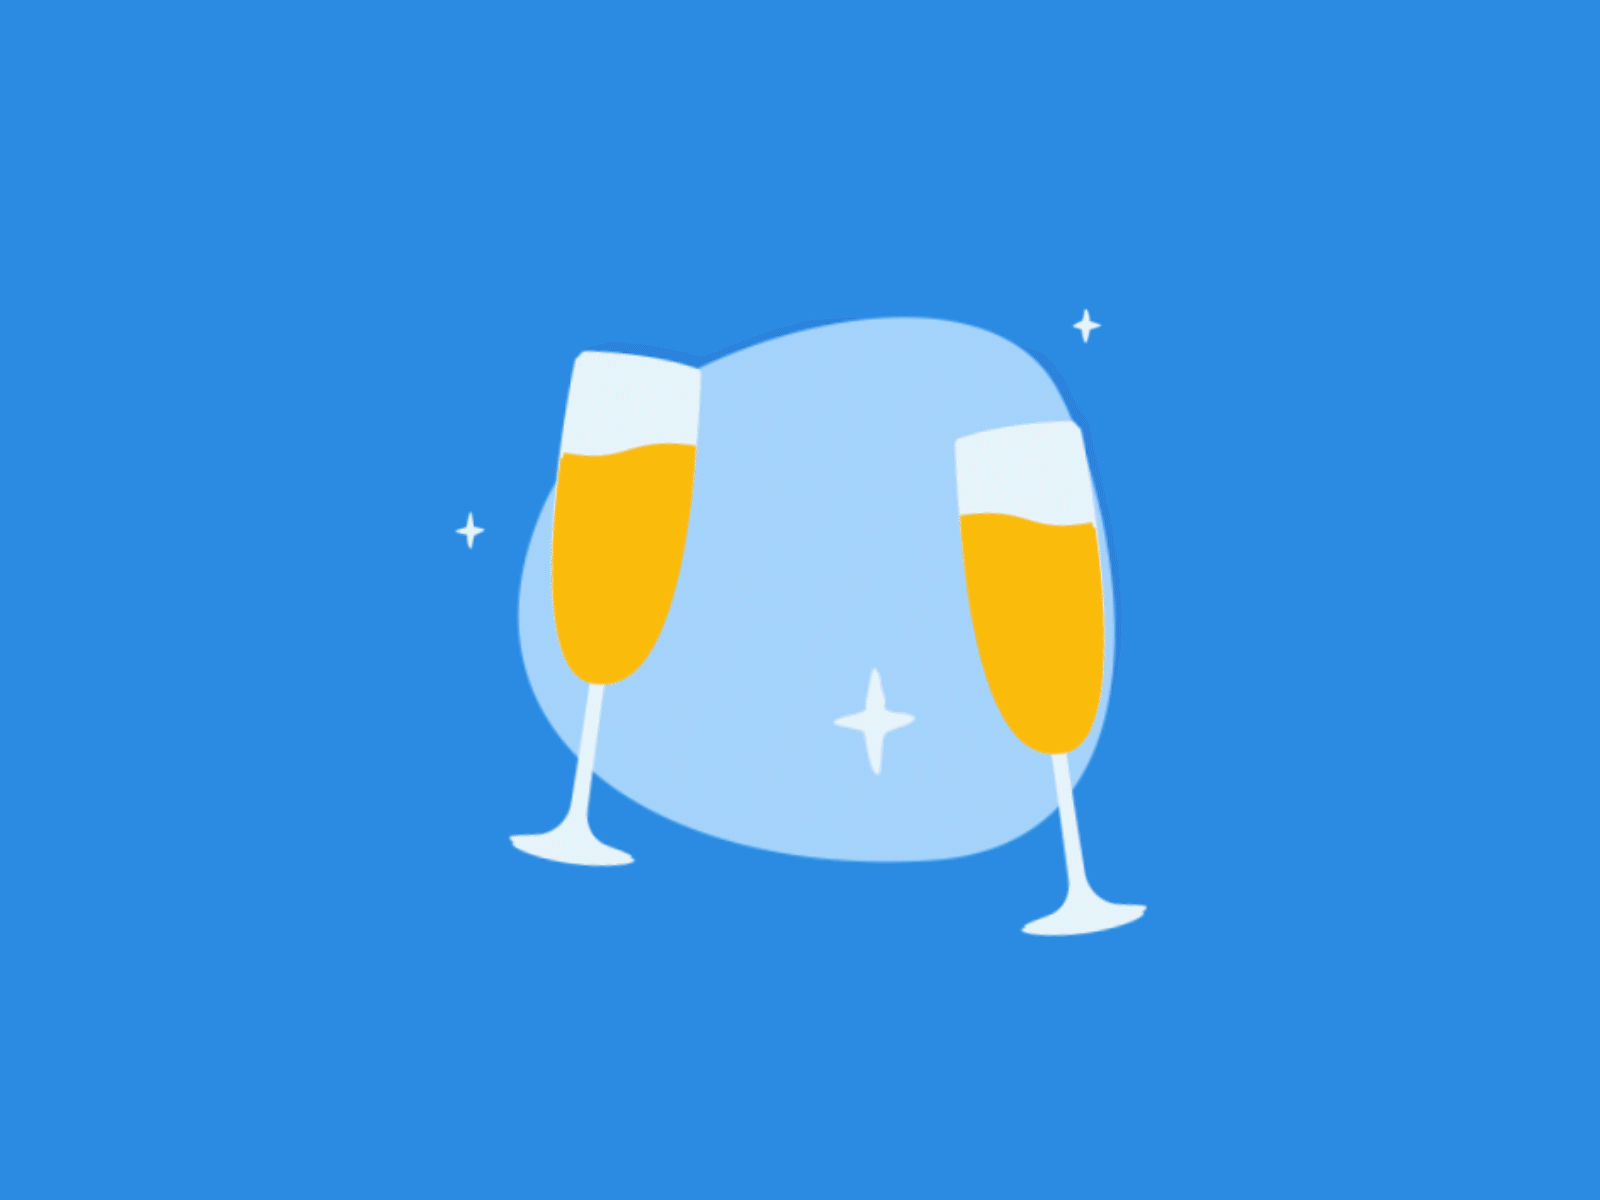 Cheers to meeting your financial goals albert app boomerang champagne cheers clean drinks finance fintech glasses illustration mimosas ui ux